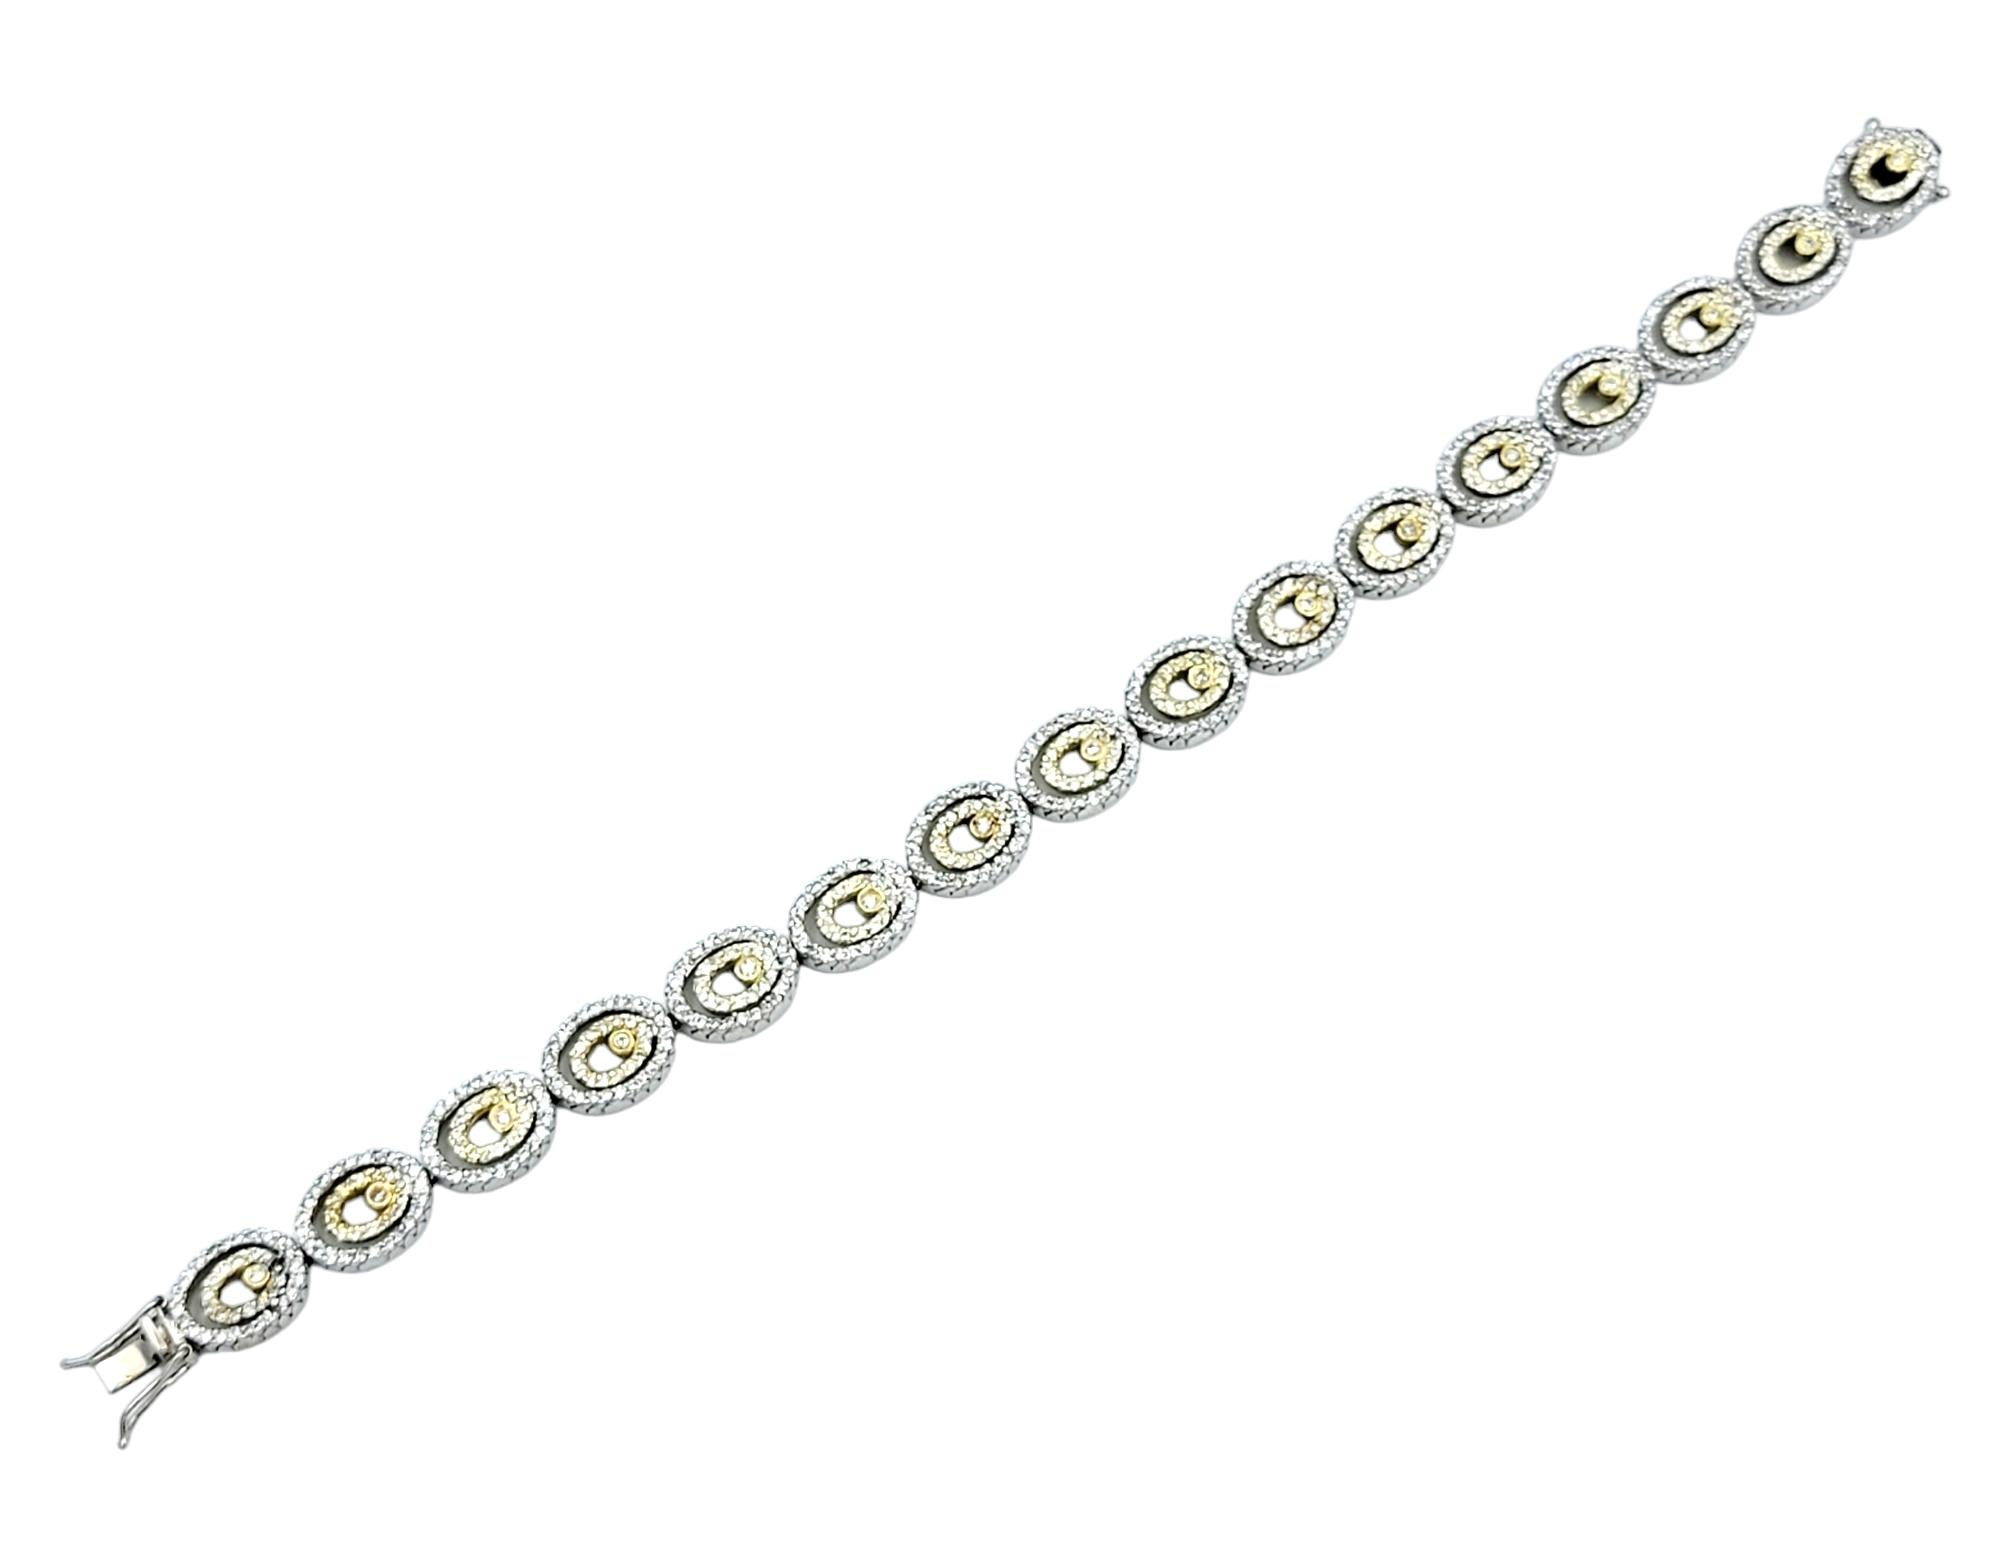 This exquisite diamond bracelet is a testament to the artistry of fine jewelry, crafted in luxurious 14 karat gold with a striking combination of white and yellow gold. The bracelet features a series of oval links, each intricately designed with